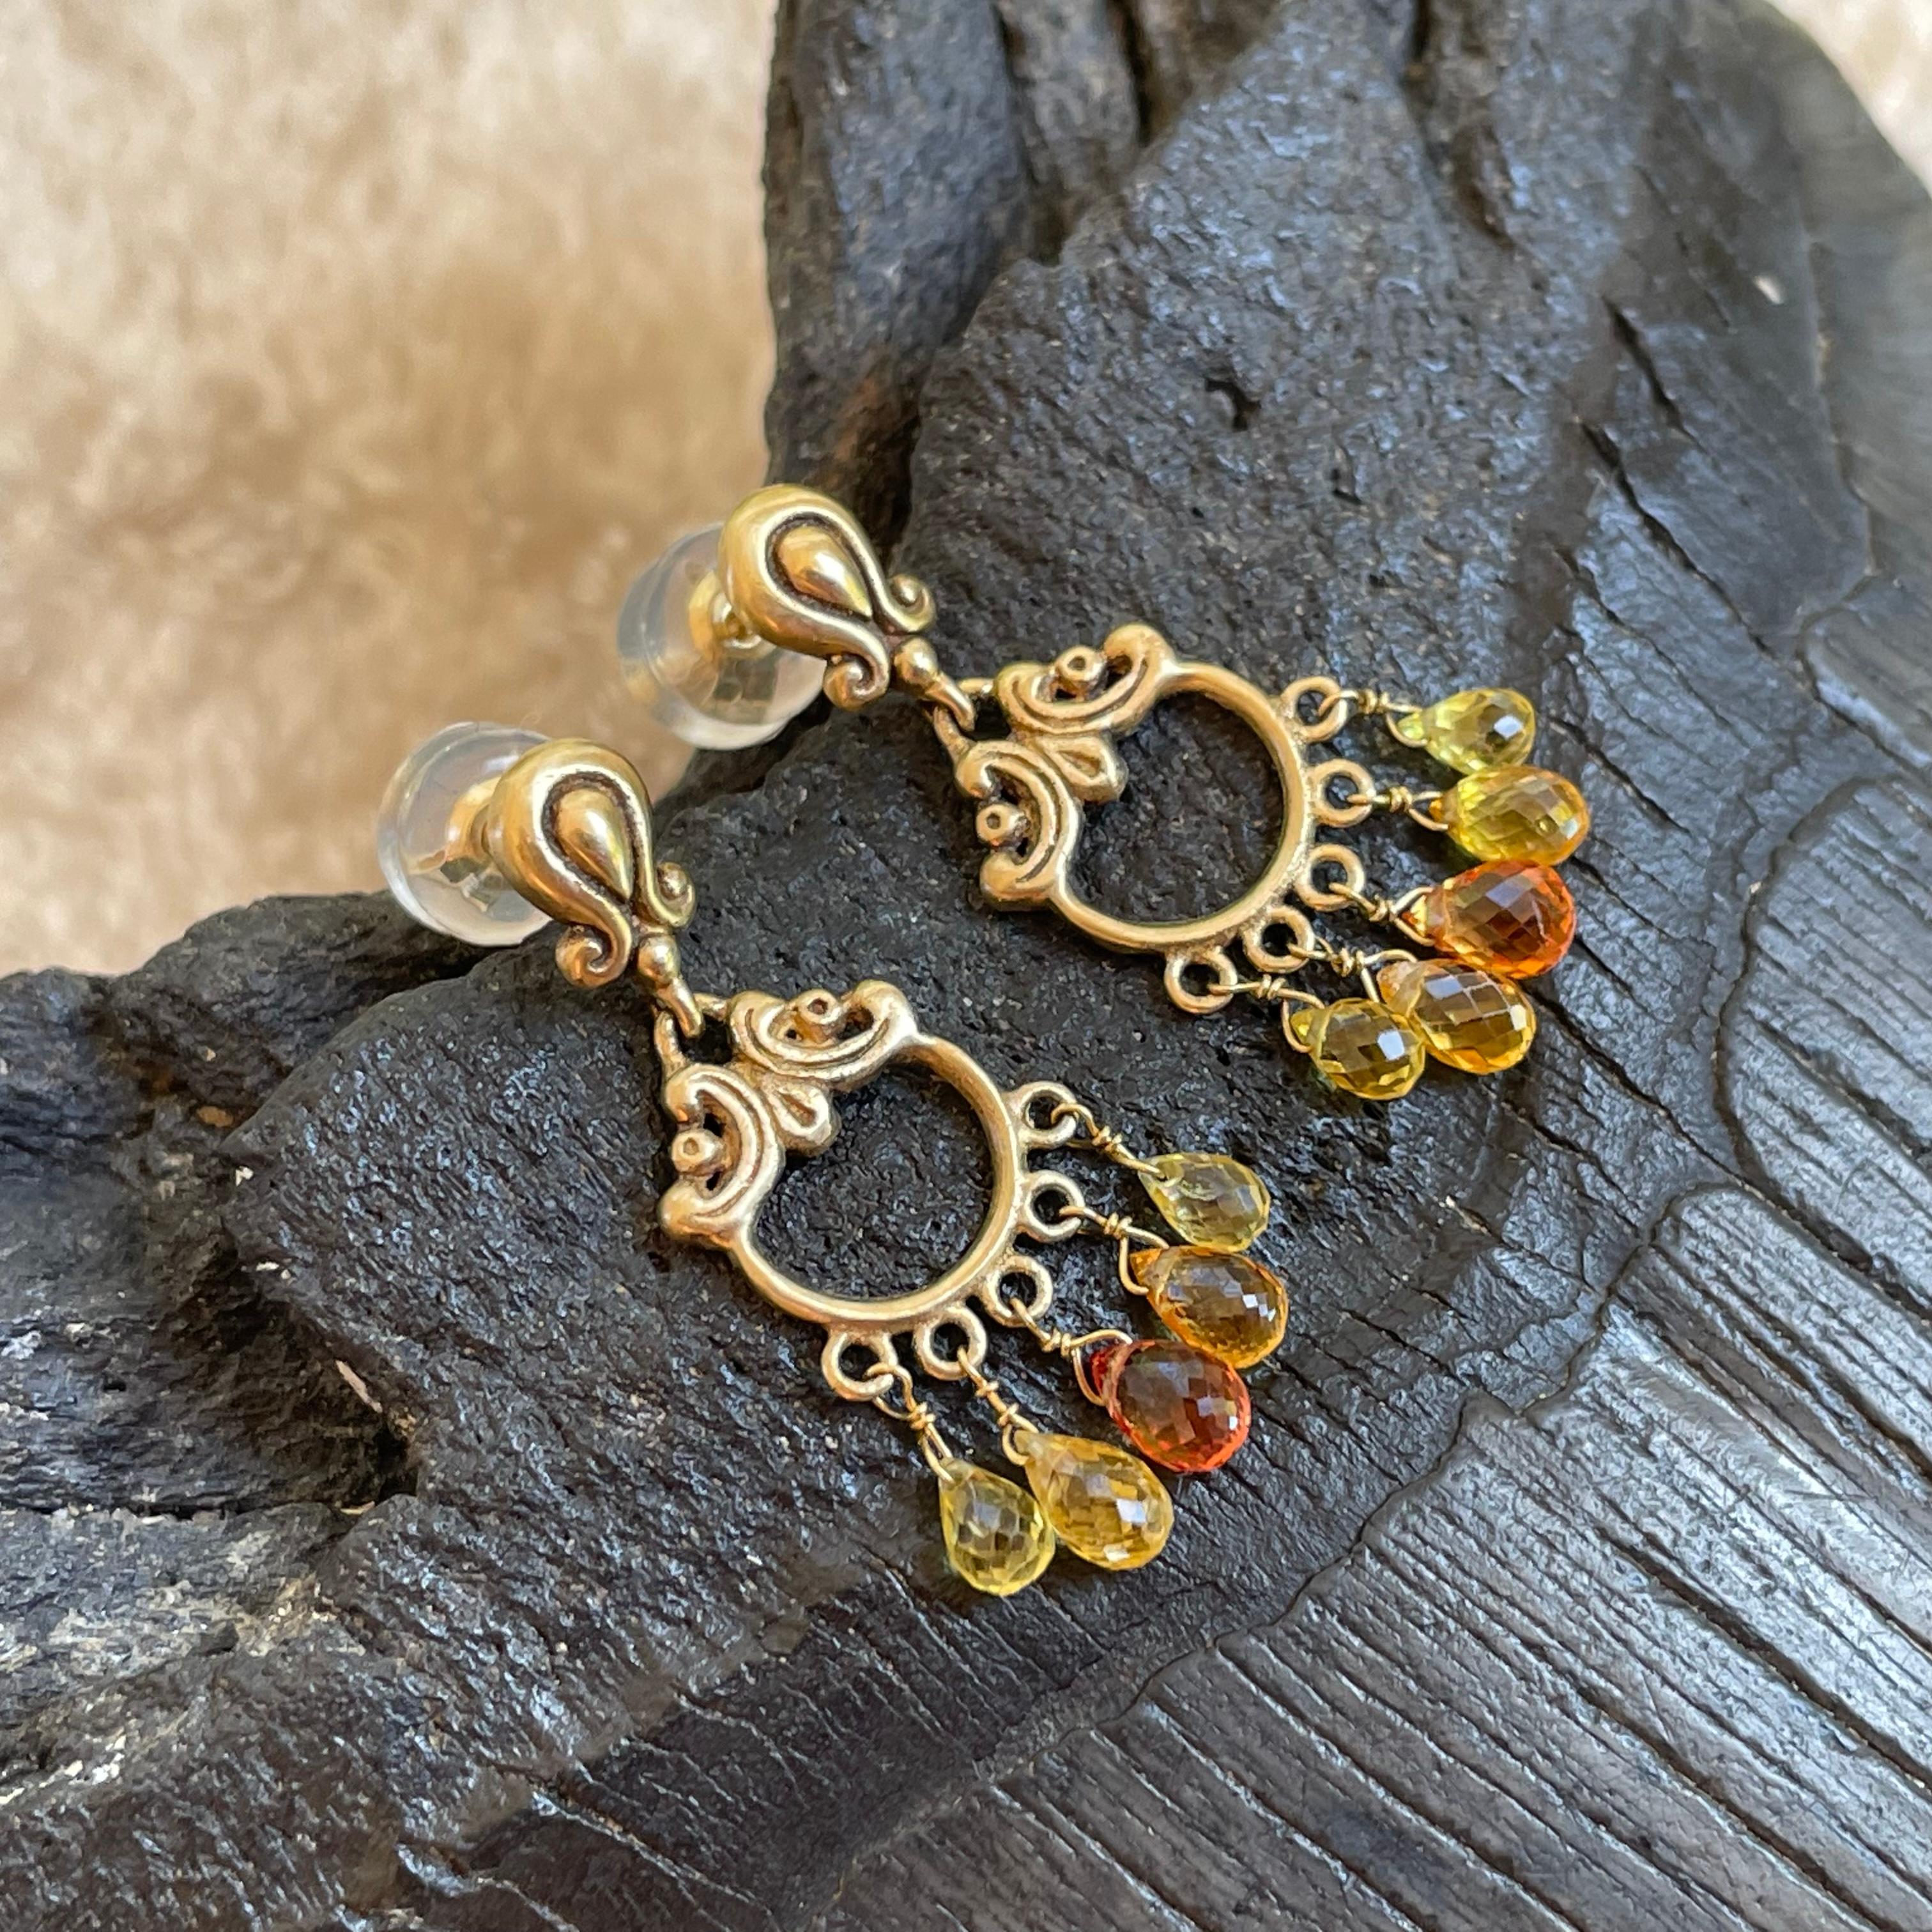 Ten lively 3 x 5 to 4 x 6 mm yellow to orange faceted sapphire briolette drops dangle below carved 18K hoops and sculpted spiral decorated posts in this elegant Steven Battelle earring design.  